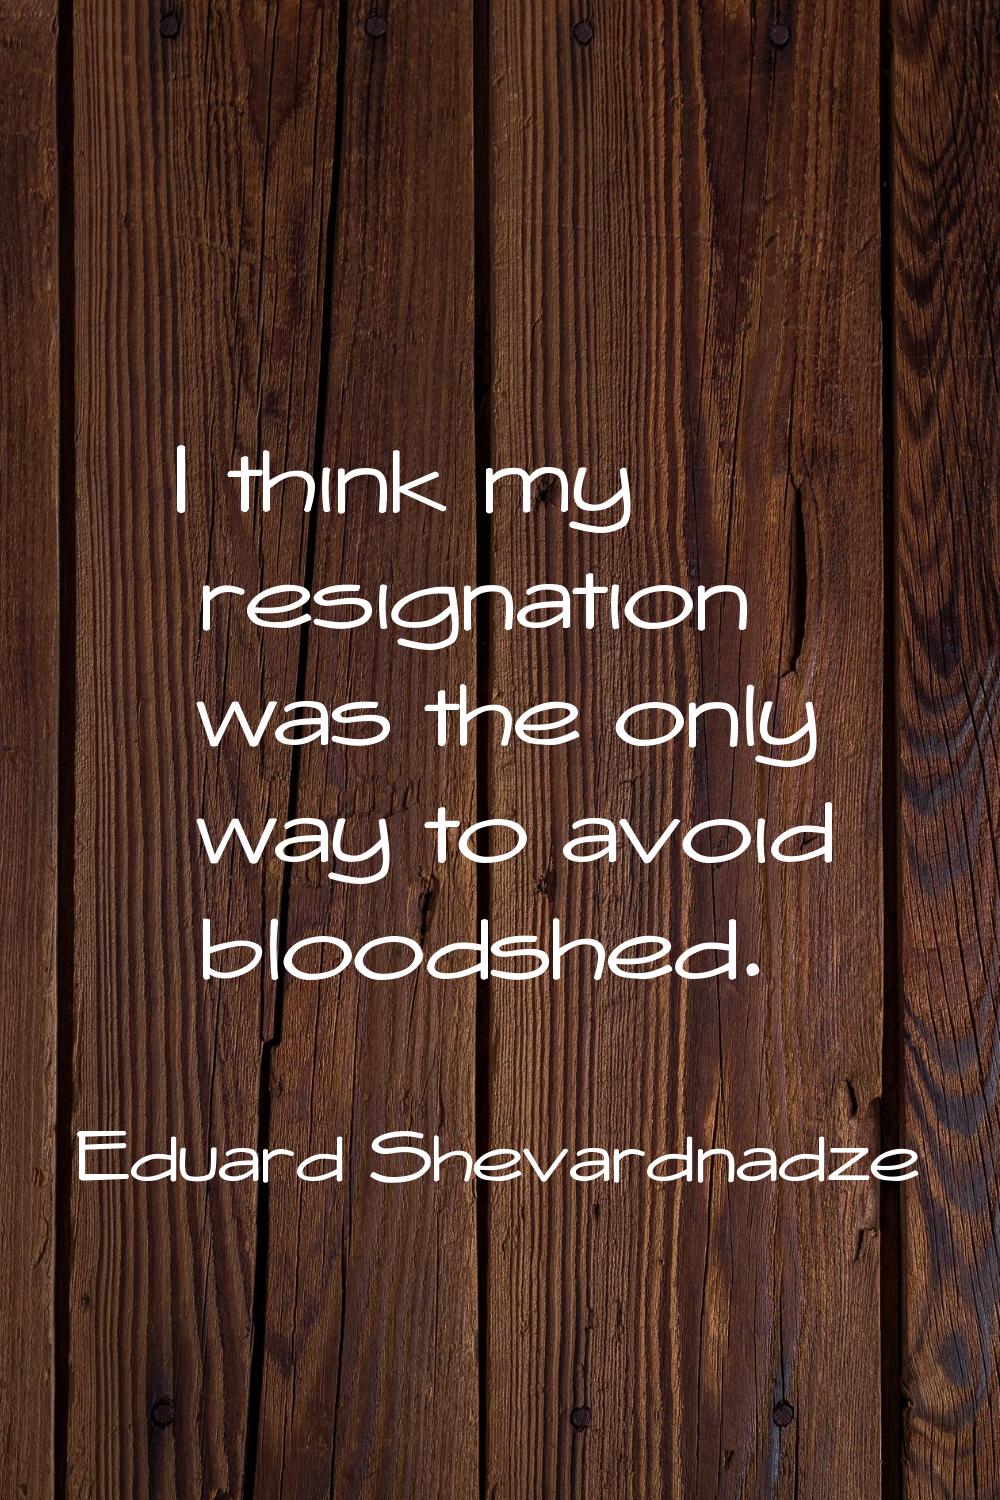 I think my resignation was the only way to avoid bloodshed.